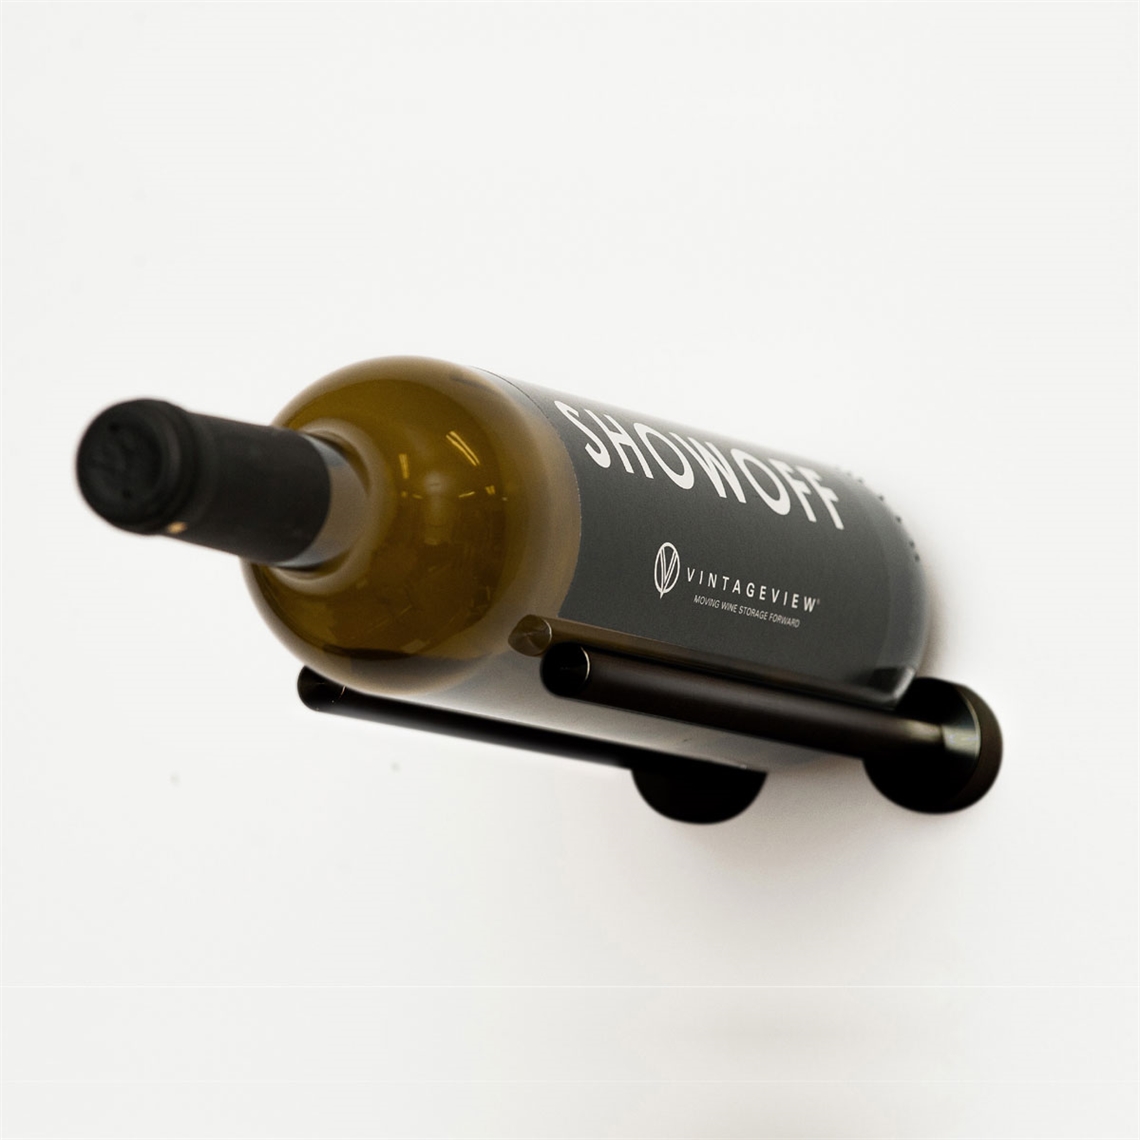 View more wall mounted w series from our Wall Mounted Wine Racks range